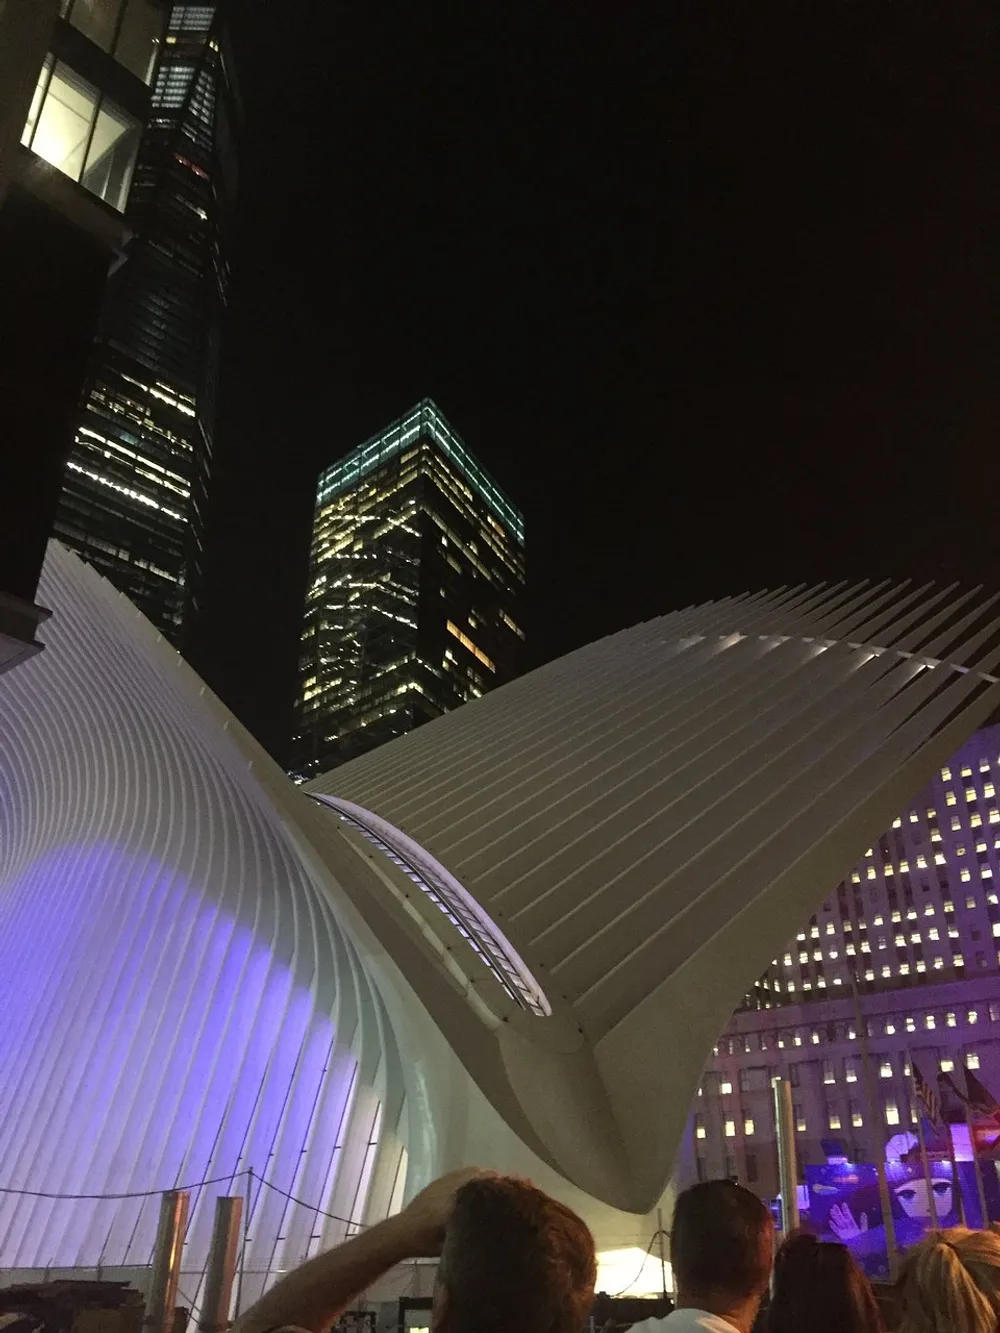 The image shows the illuminated wing-like structure of the Oculus at the World Trade Center transportation hub in New York City with skyscrapers towering in the background at night